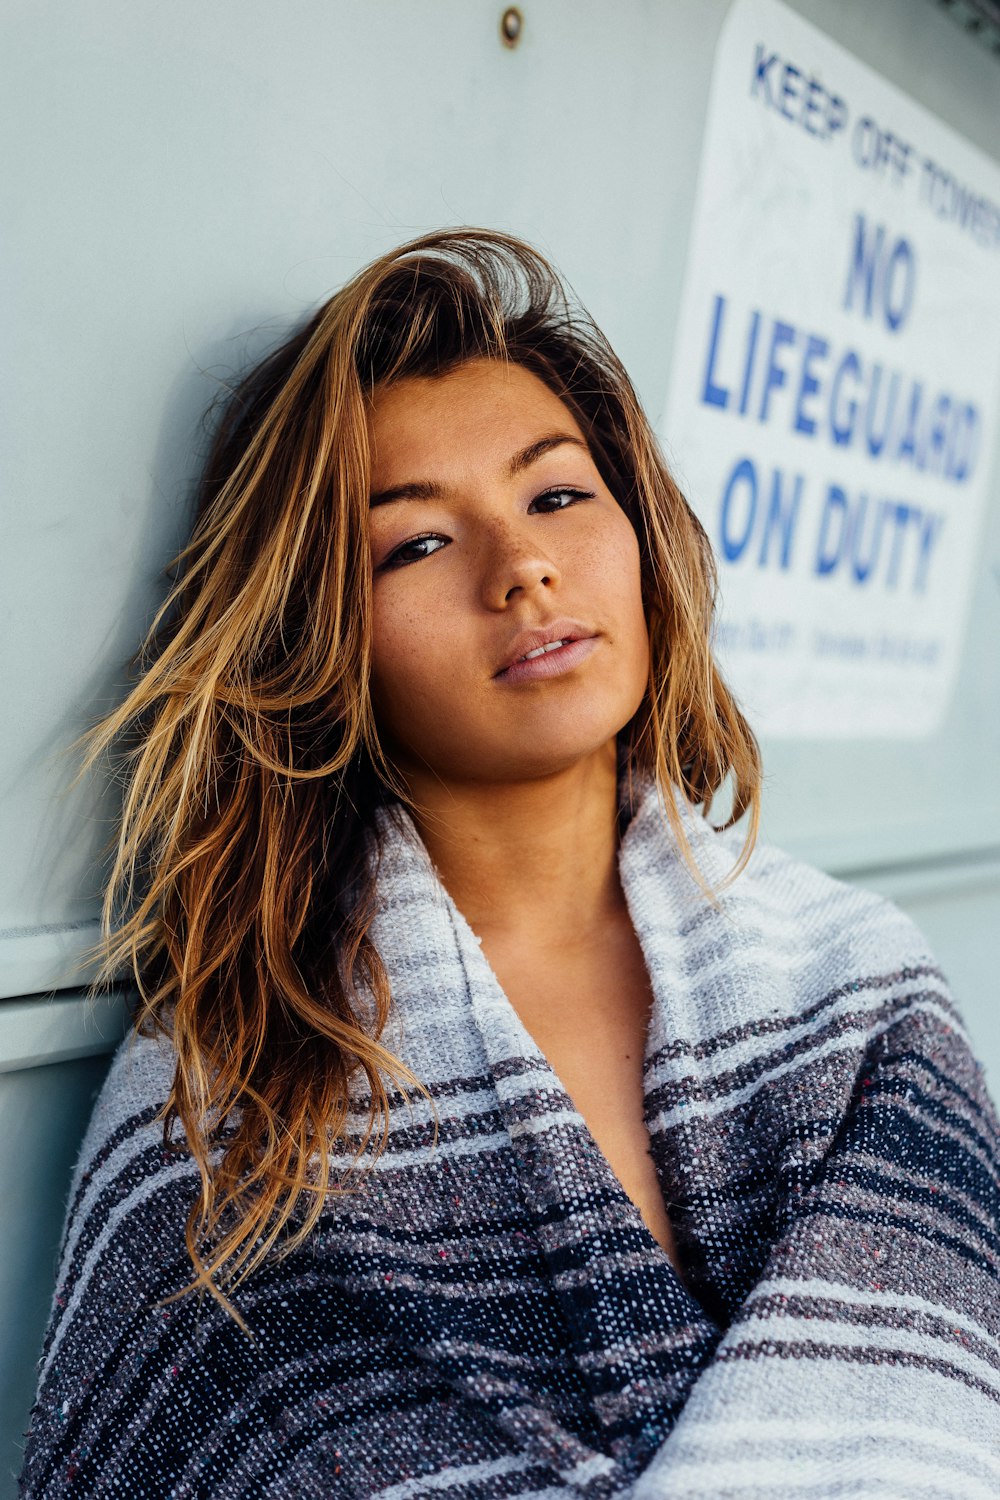 woman with black, white, and grey blanket leaning on wall with no lifeguard on duty signage